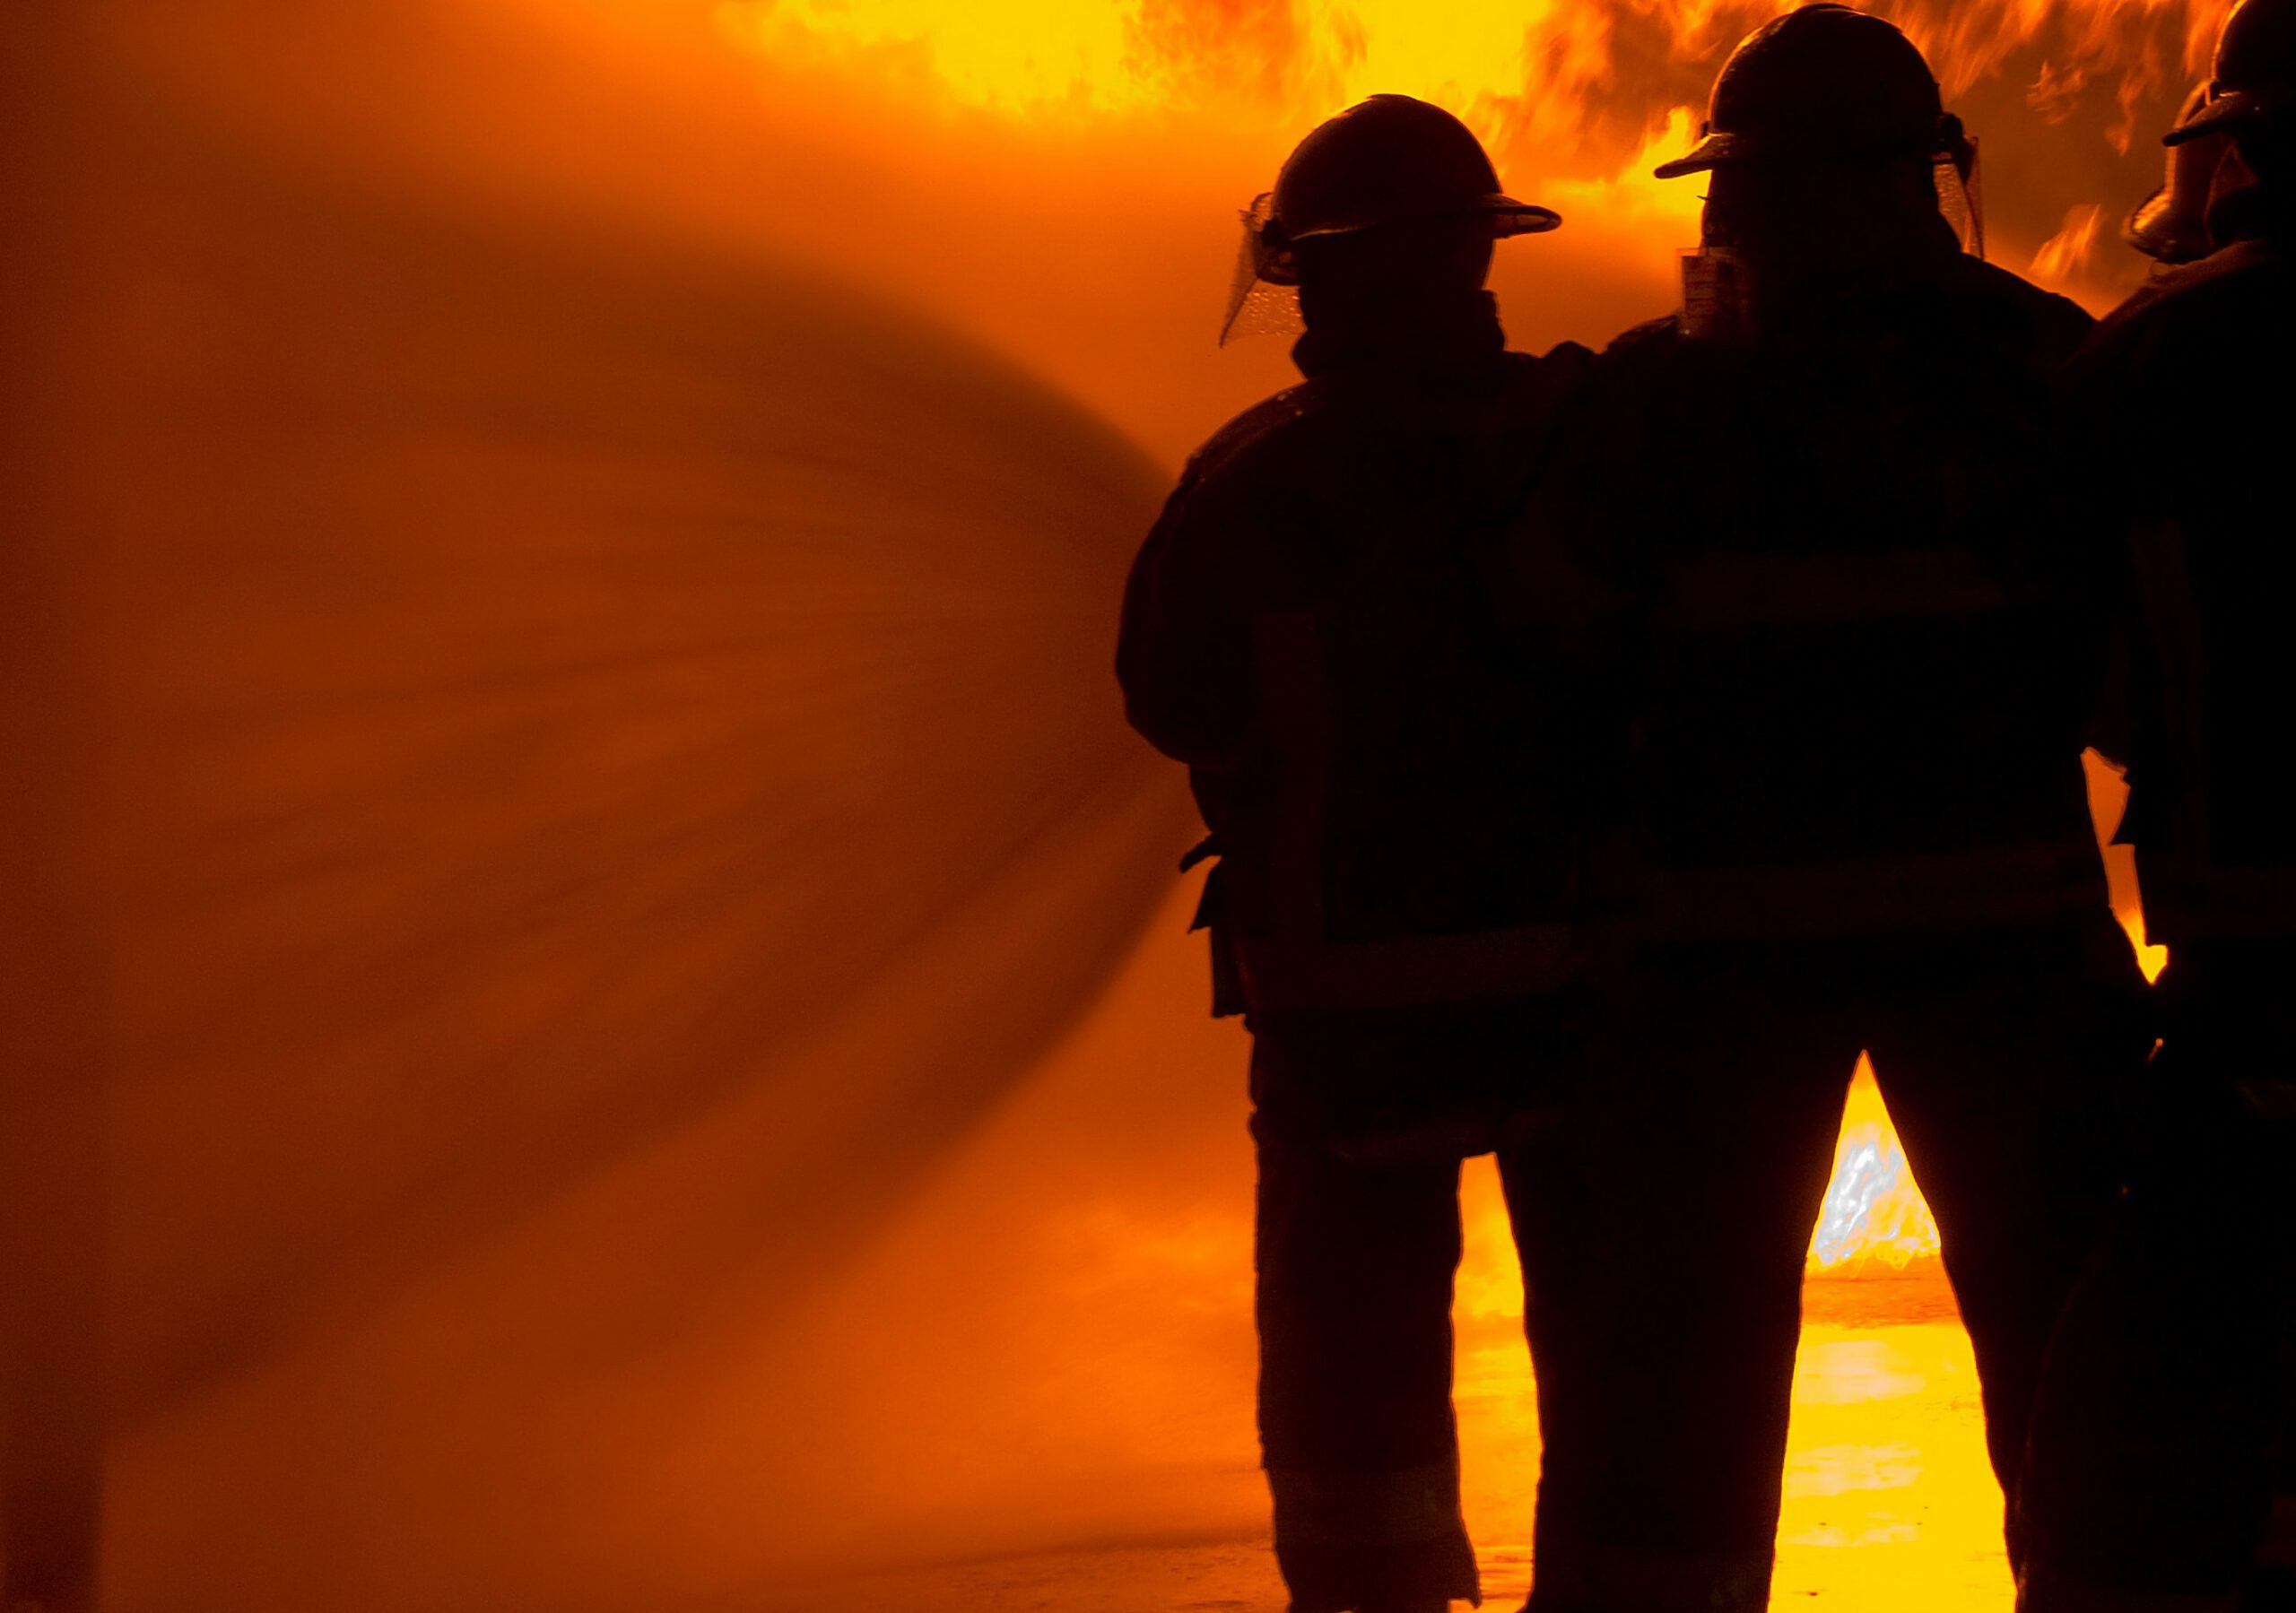 STUDY FINDS UK FIREFIGHTERS HAVE THE MOST DANGEROUS JOB